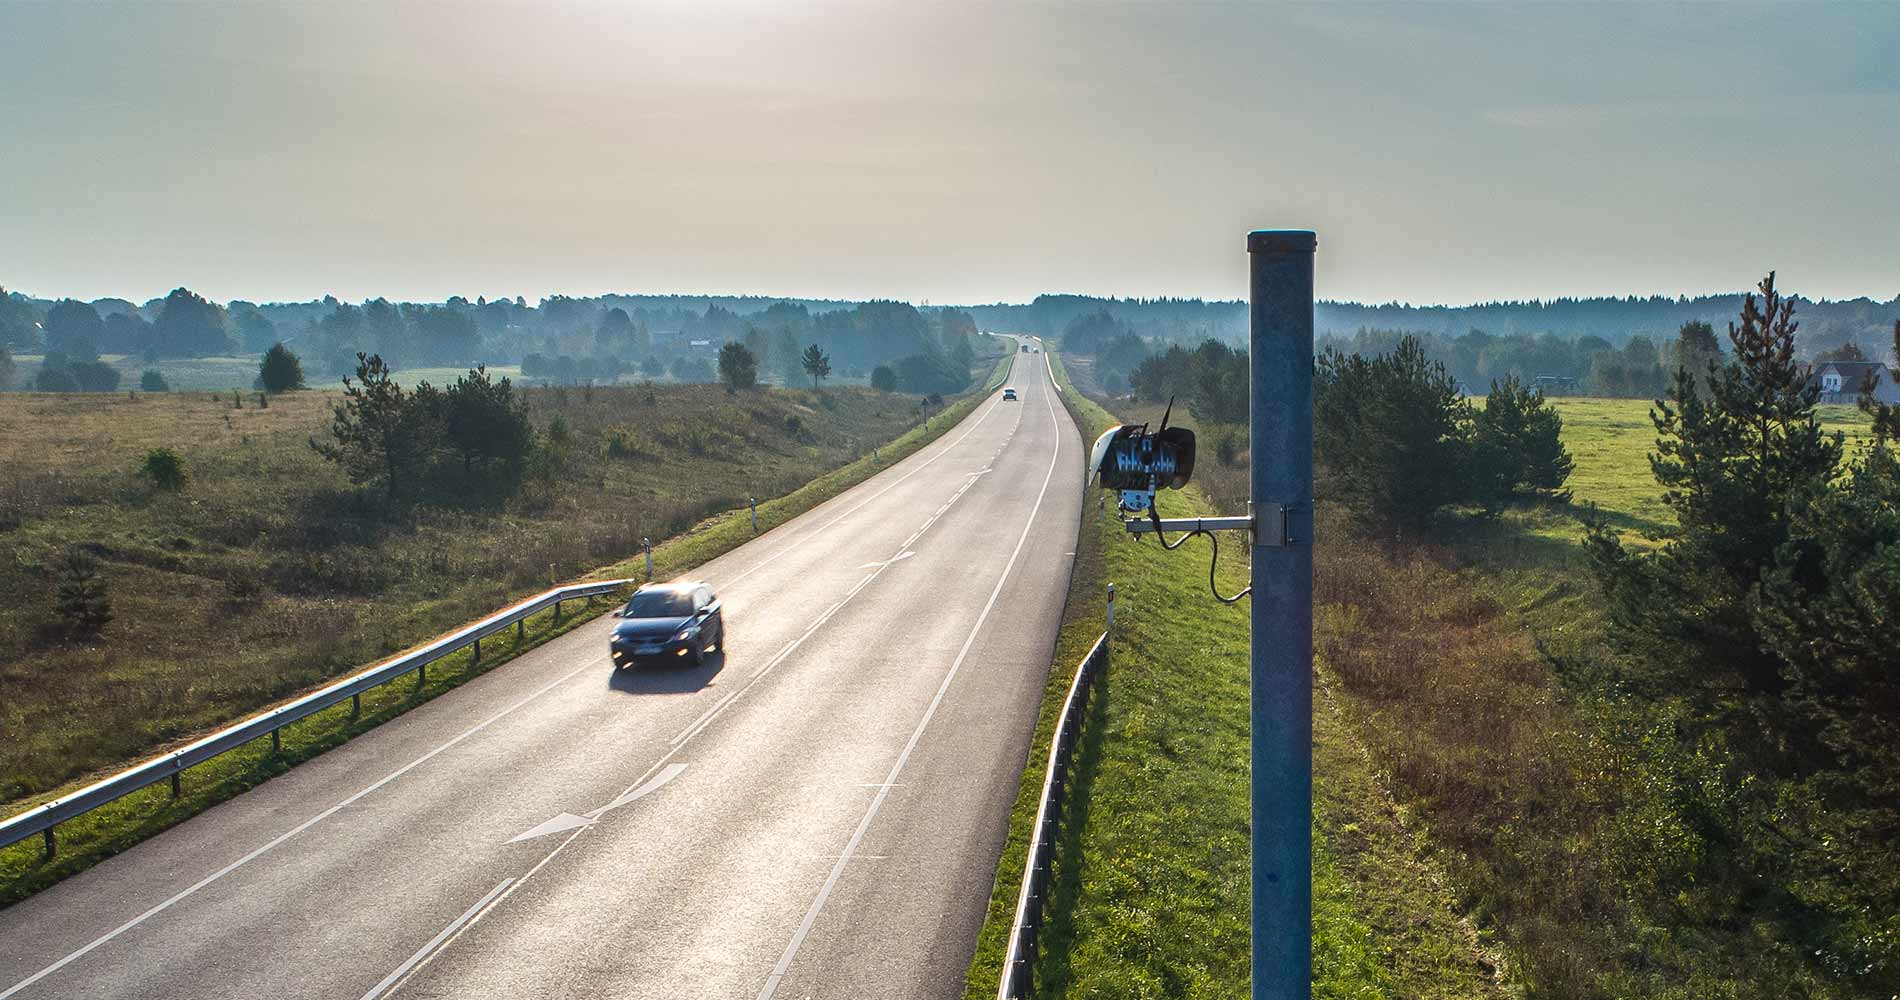 Project in Lithuania for average speed enforcement